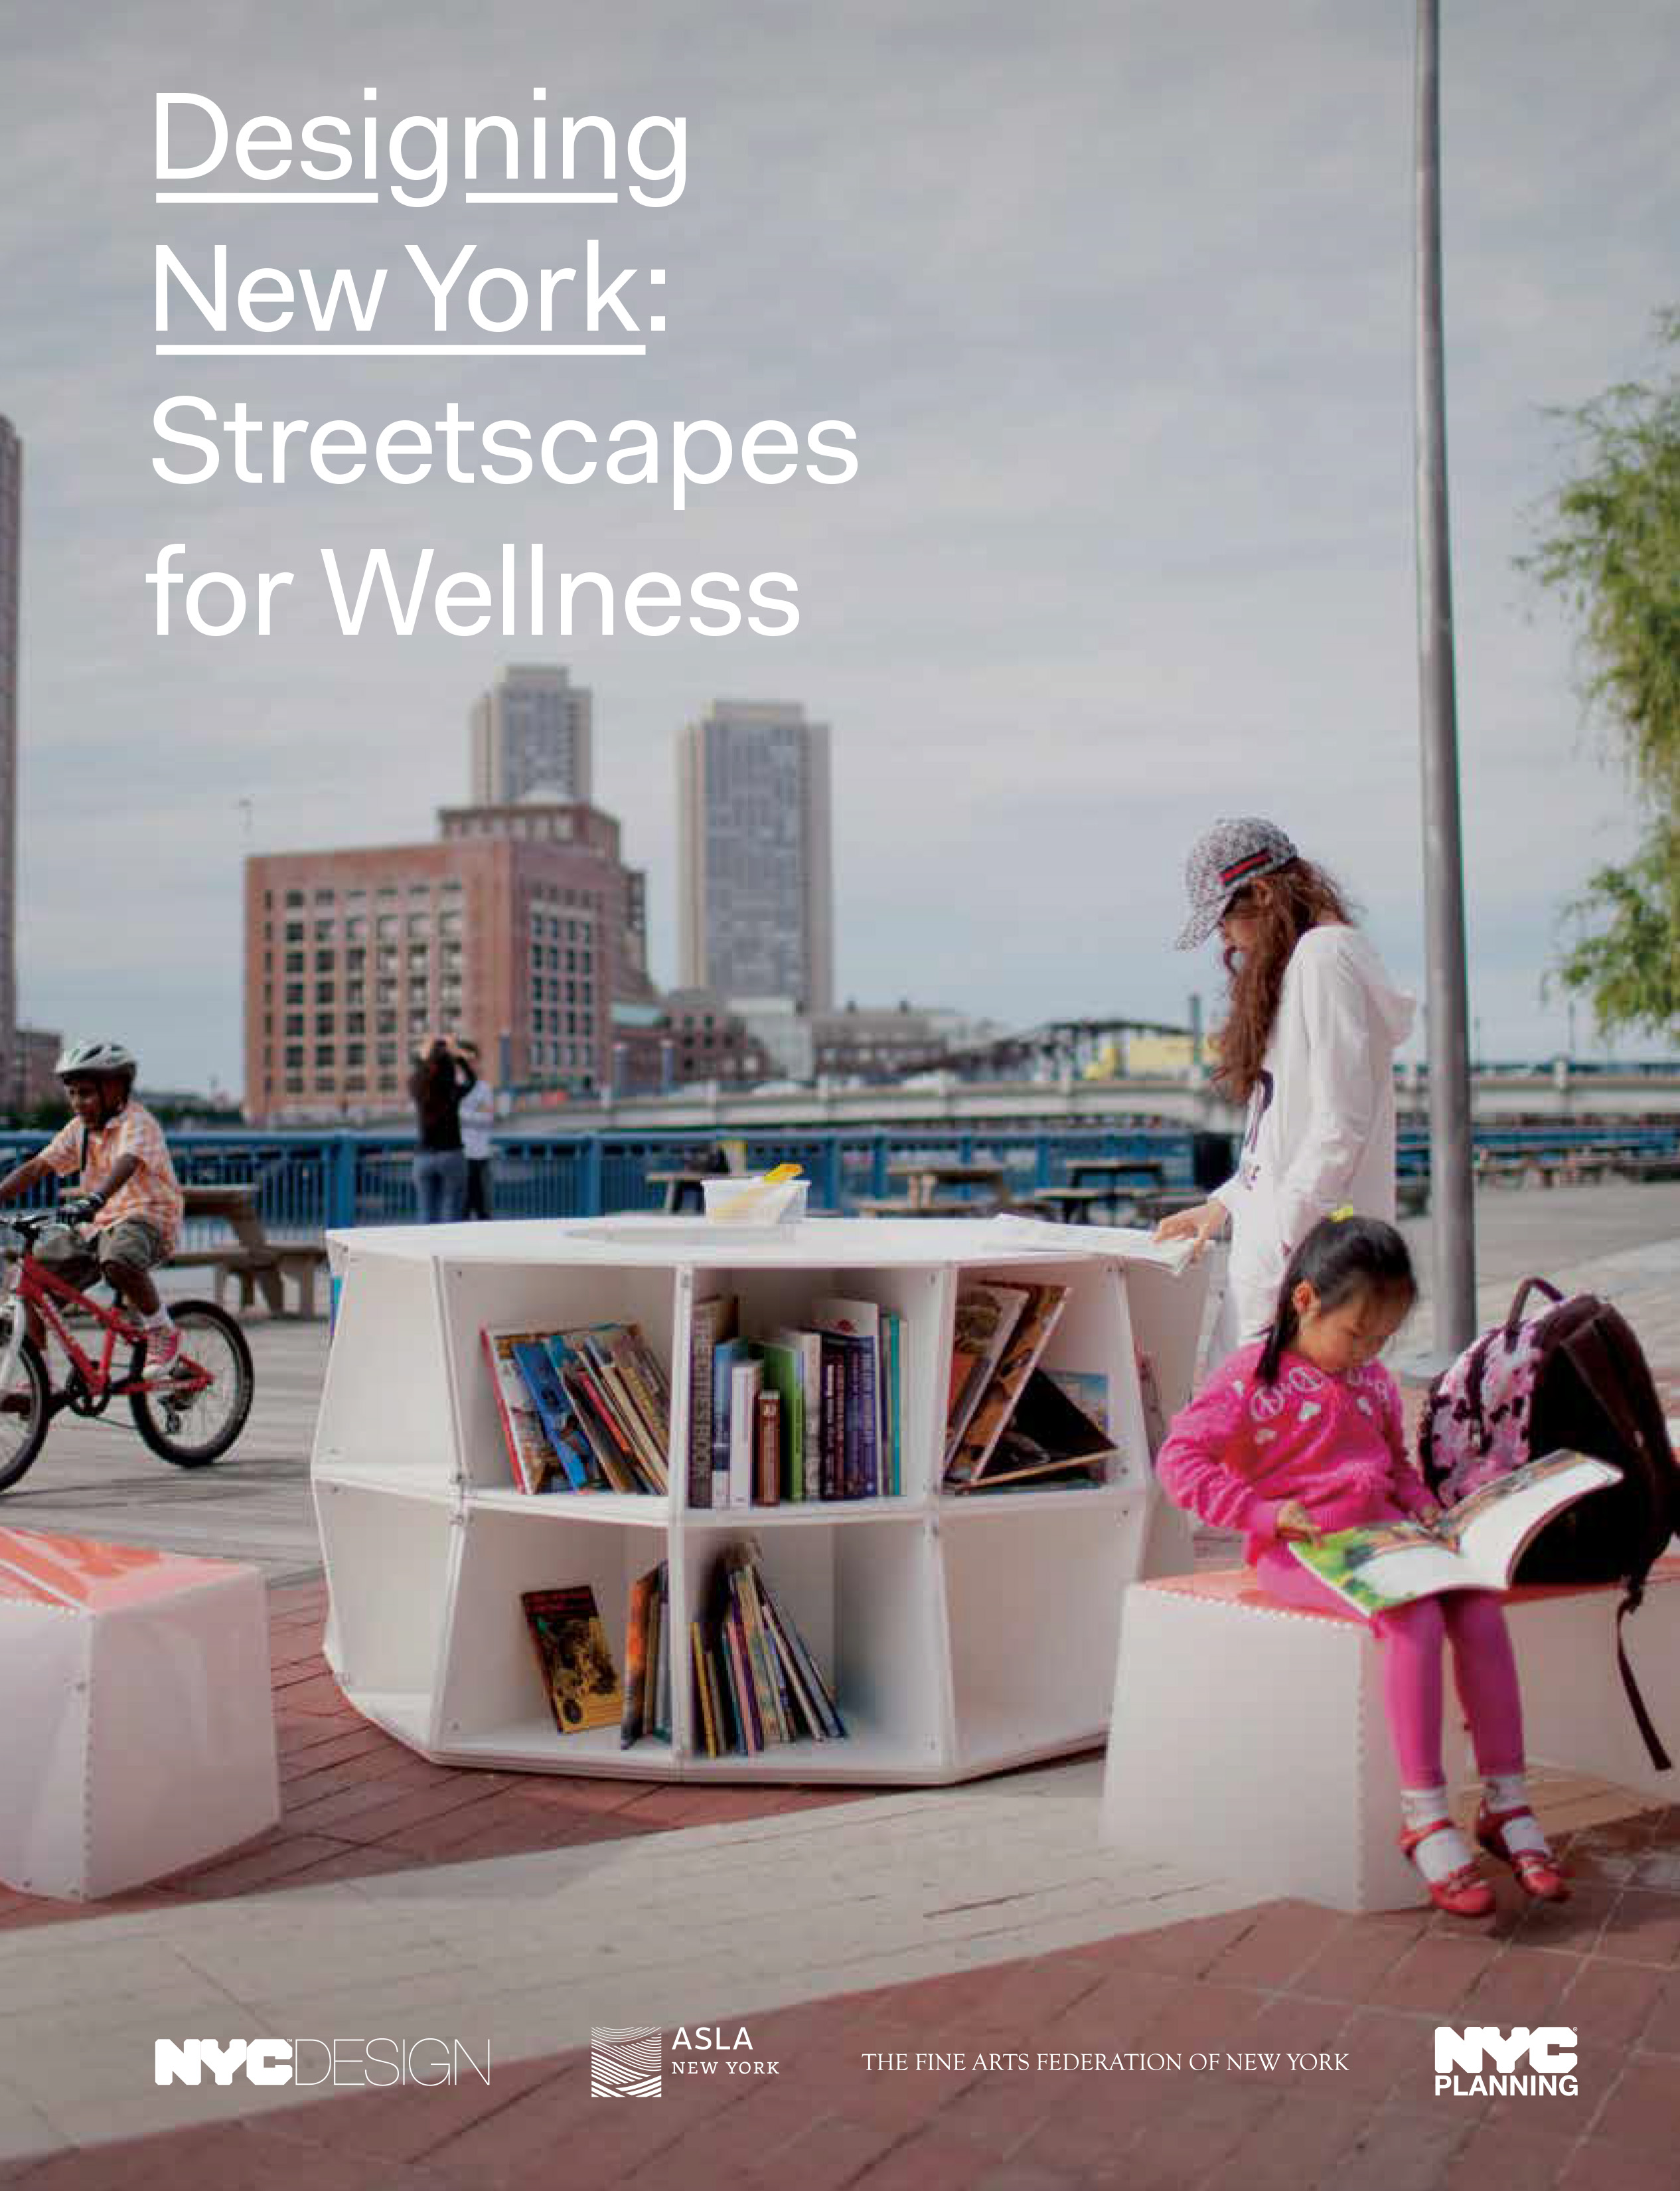 Streetscapes for Wellness